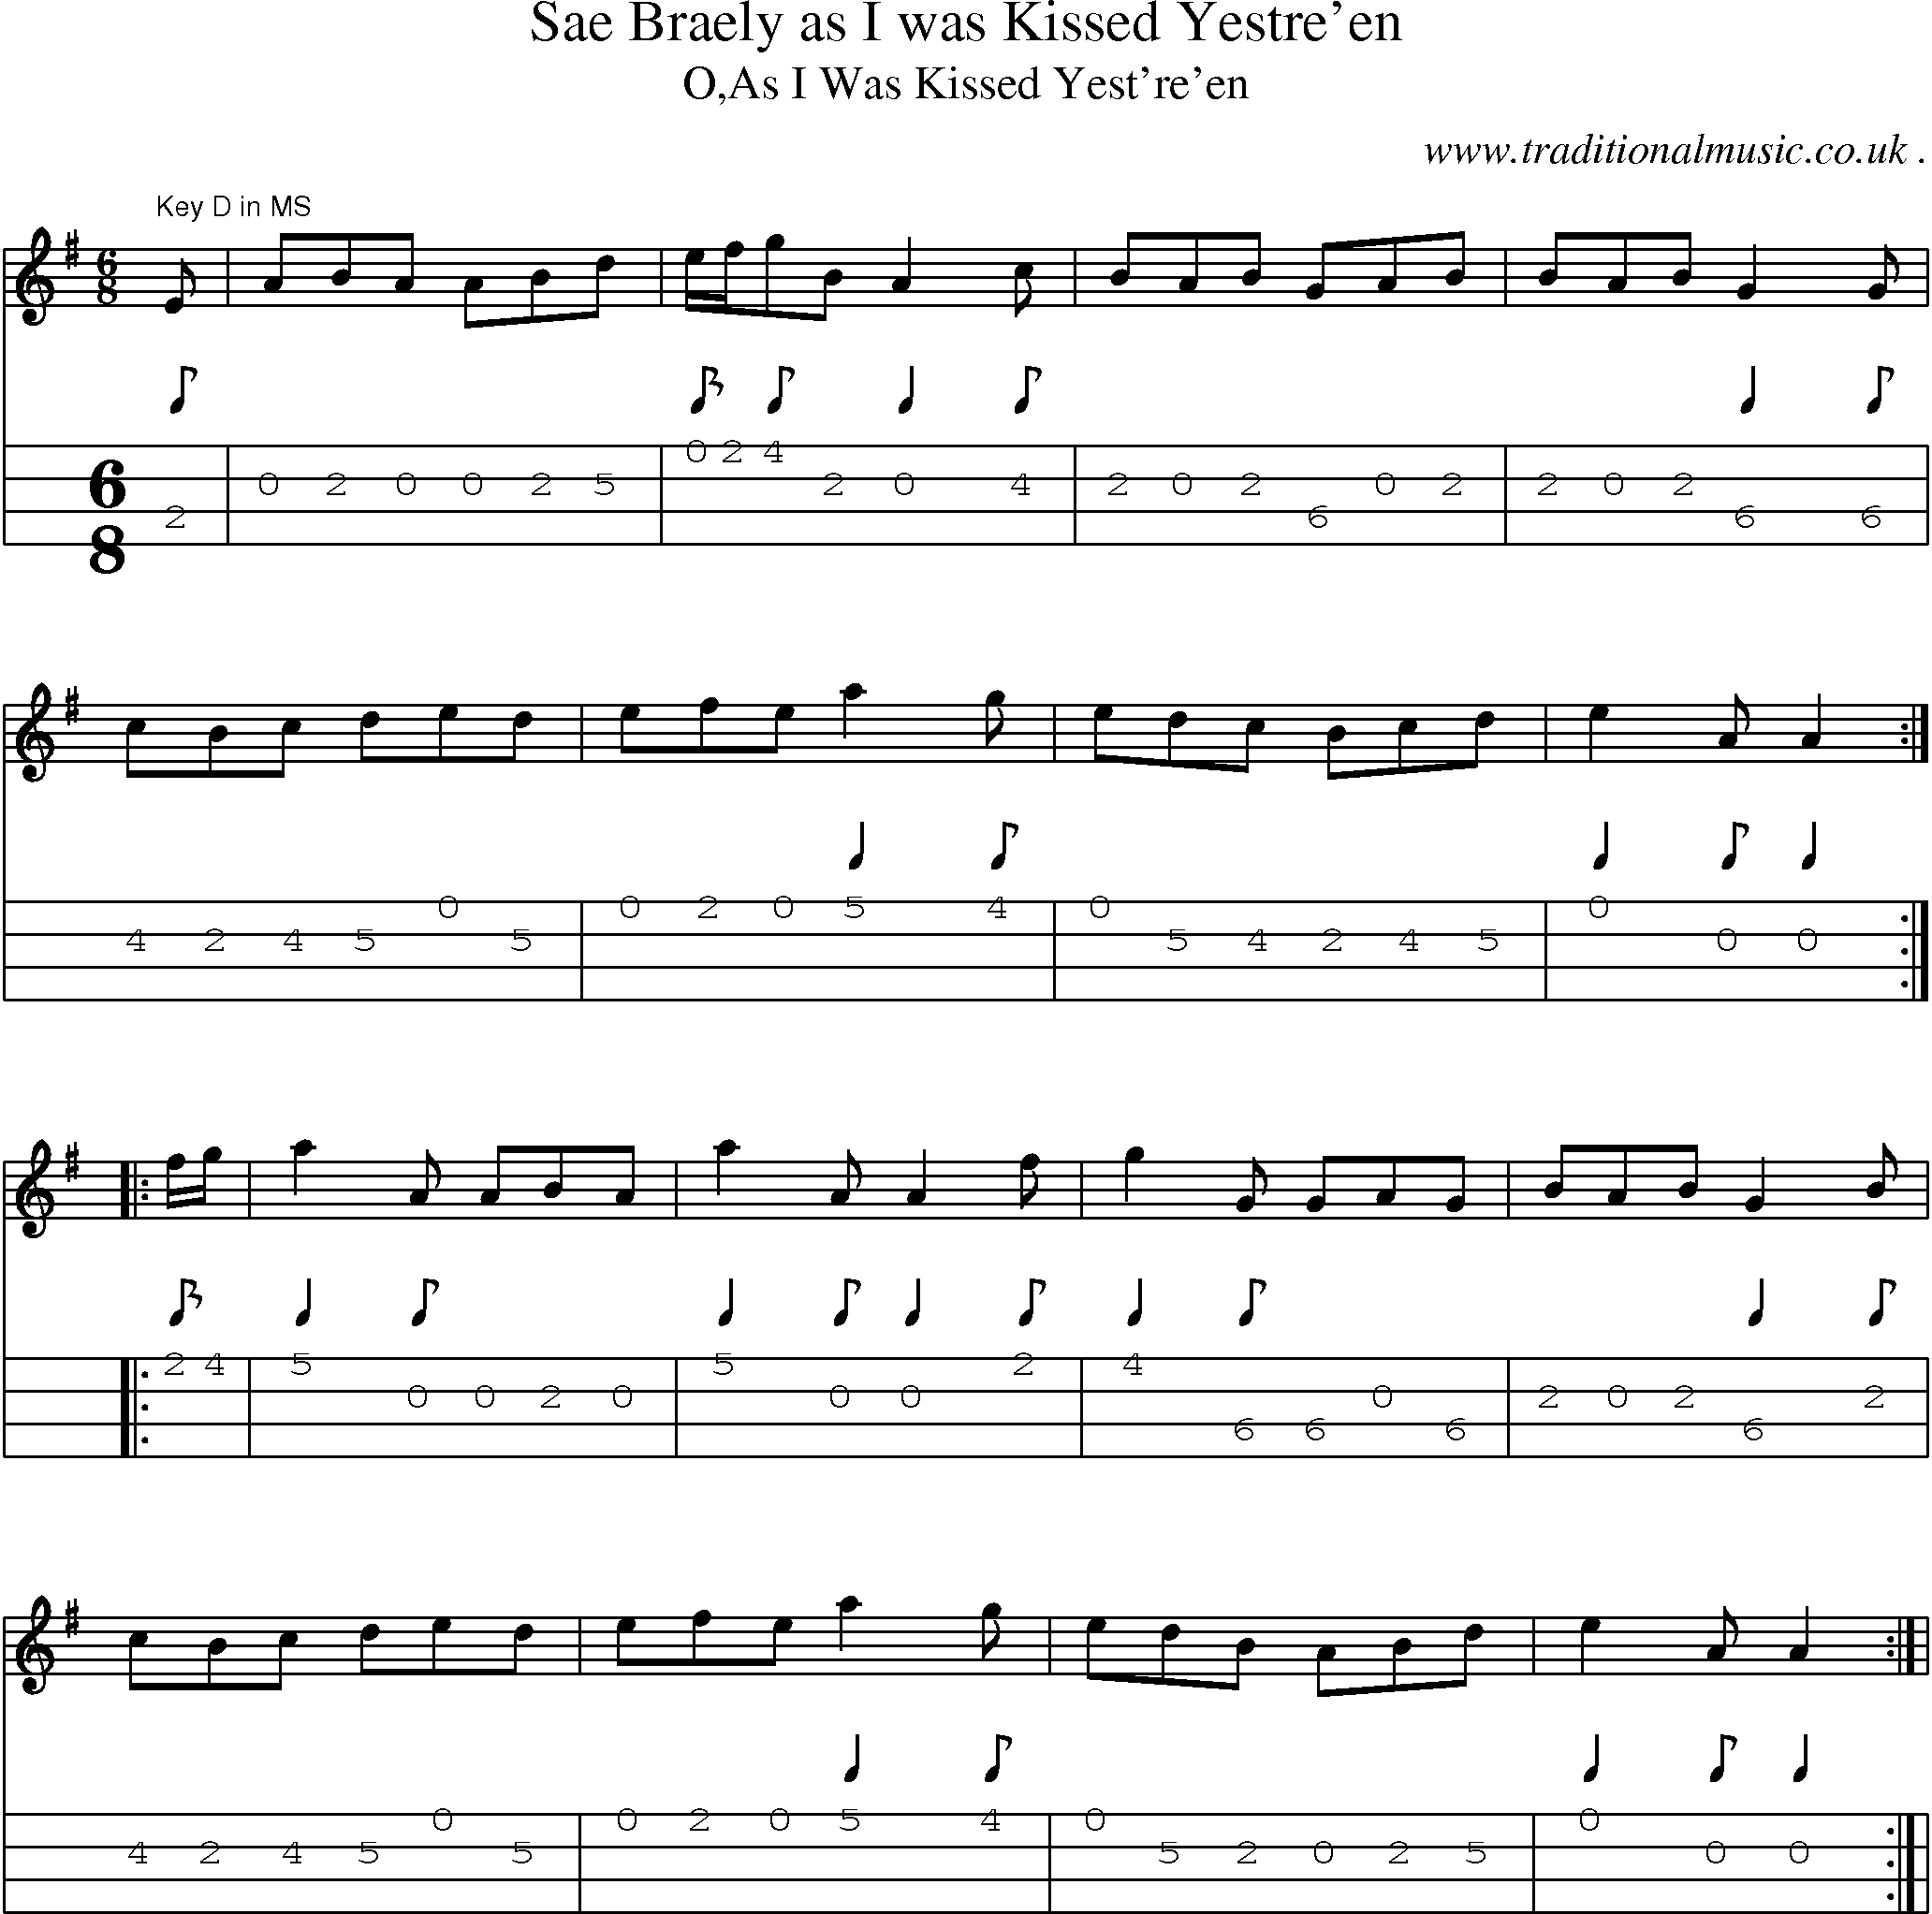 Sheet-Music and Mandolin Tabs for Sae Braely As I Was Kissed Yestreen